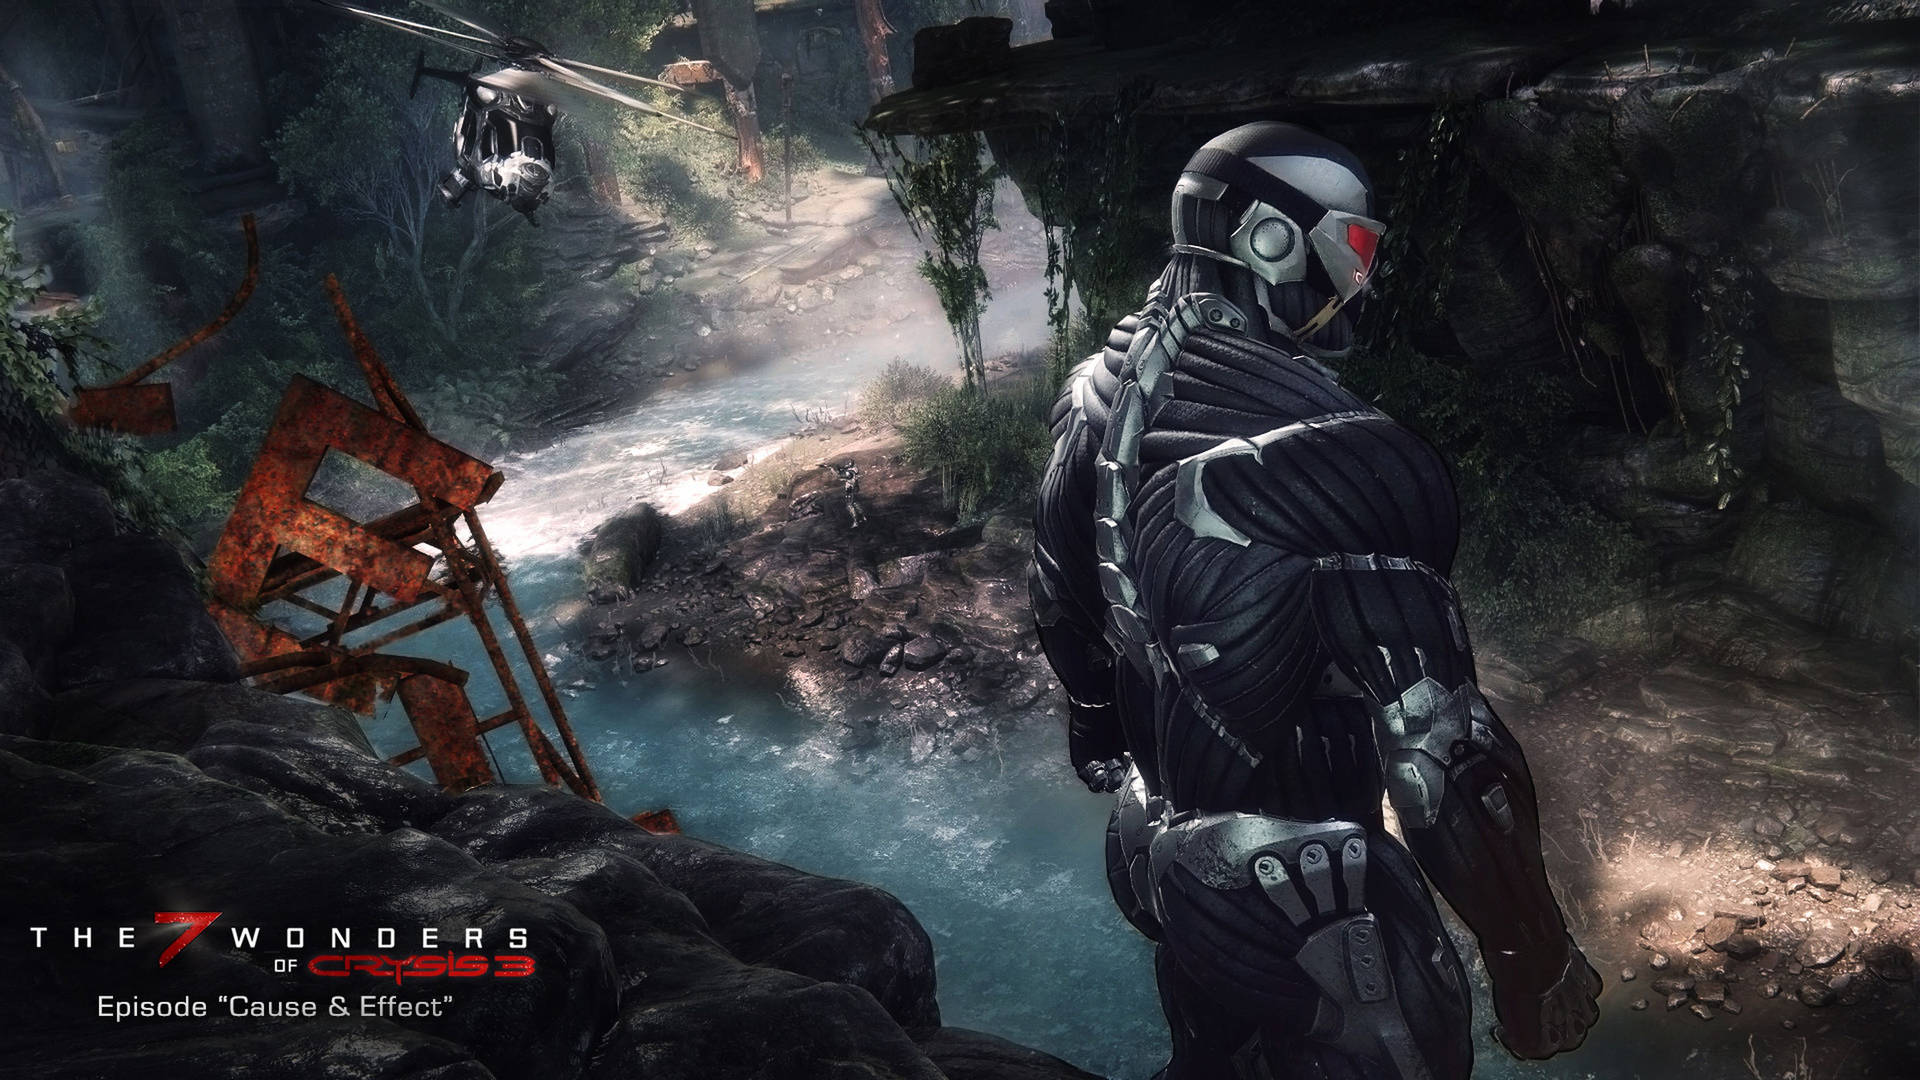 Crysis 3 Cause & Effect Episode 4k Background